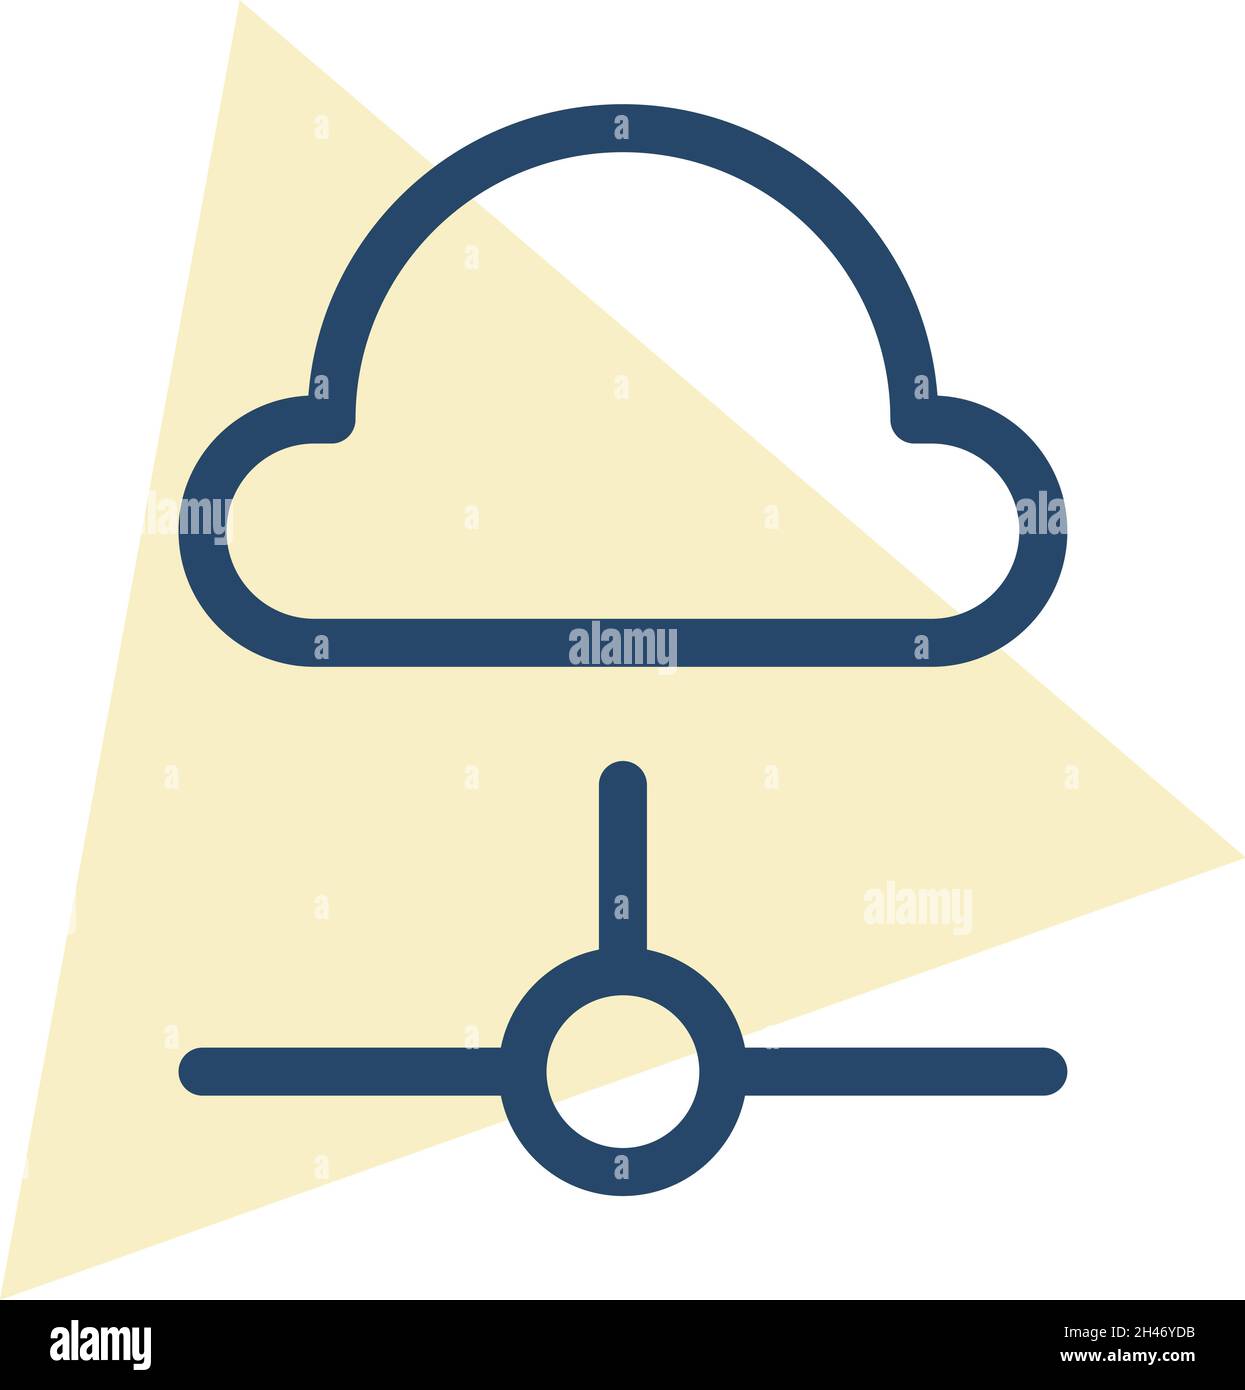 Network cloud, illustration, vector, on a white background. Stock Vector